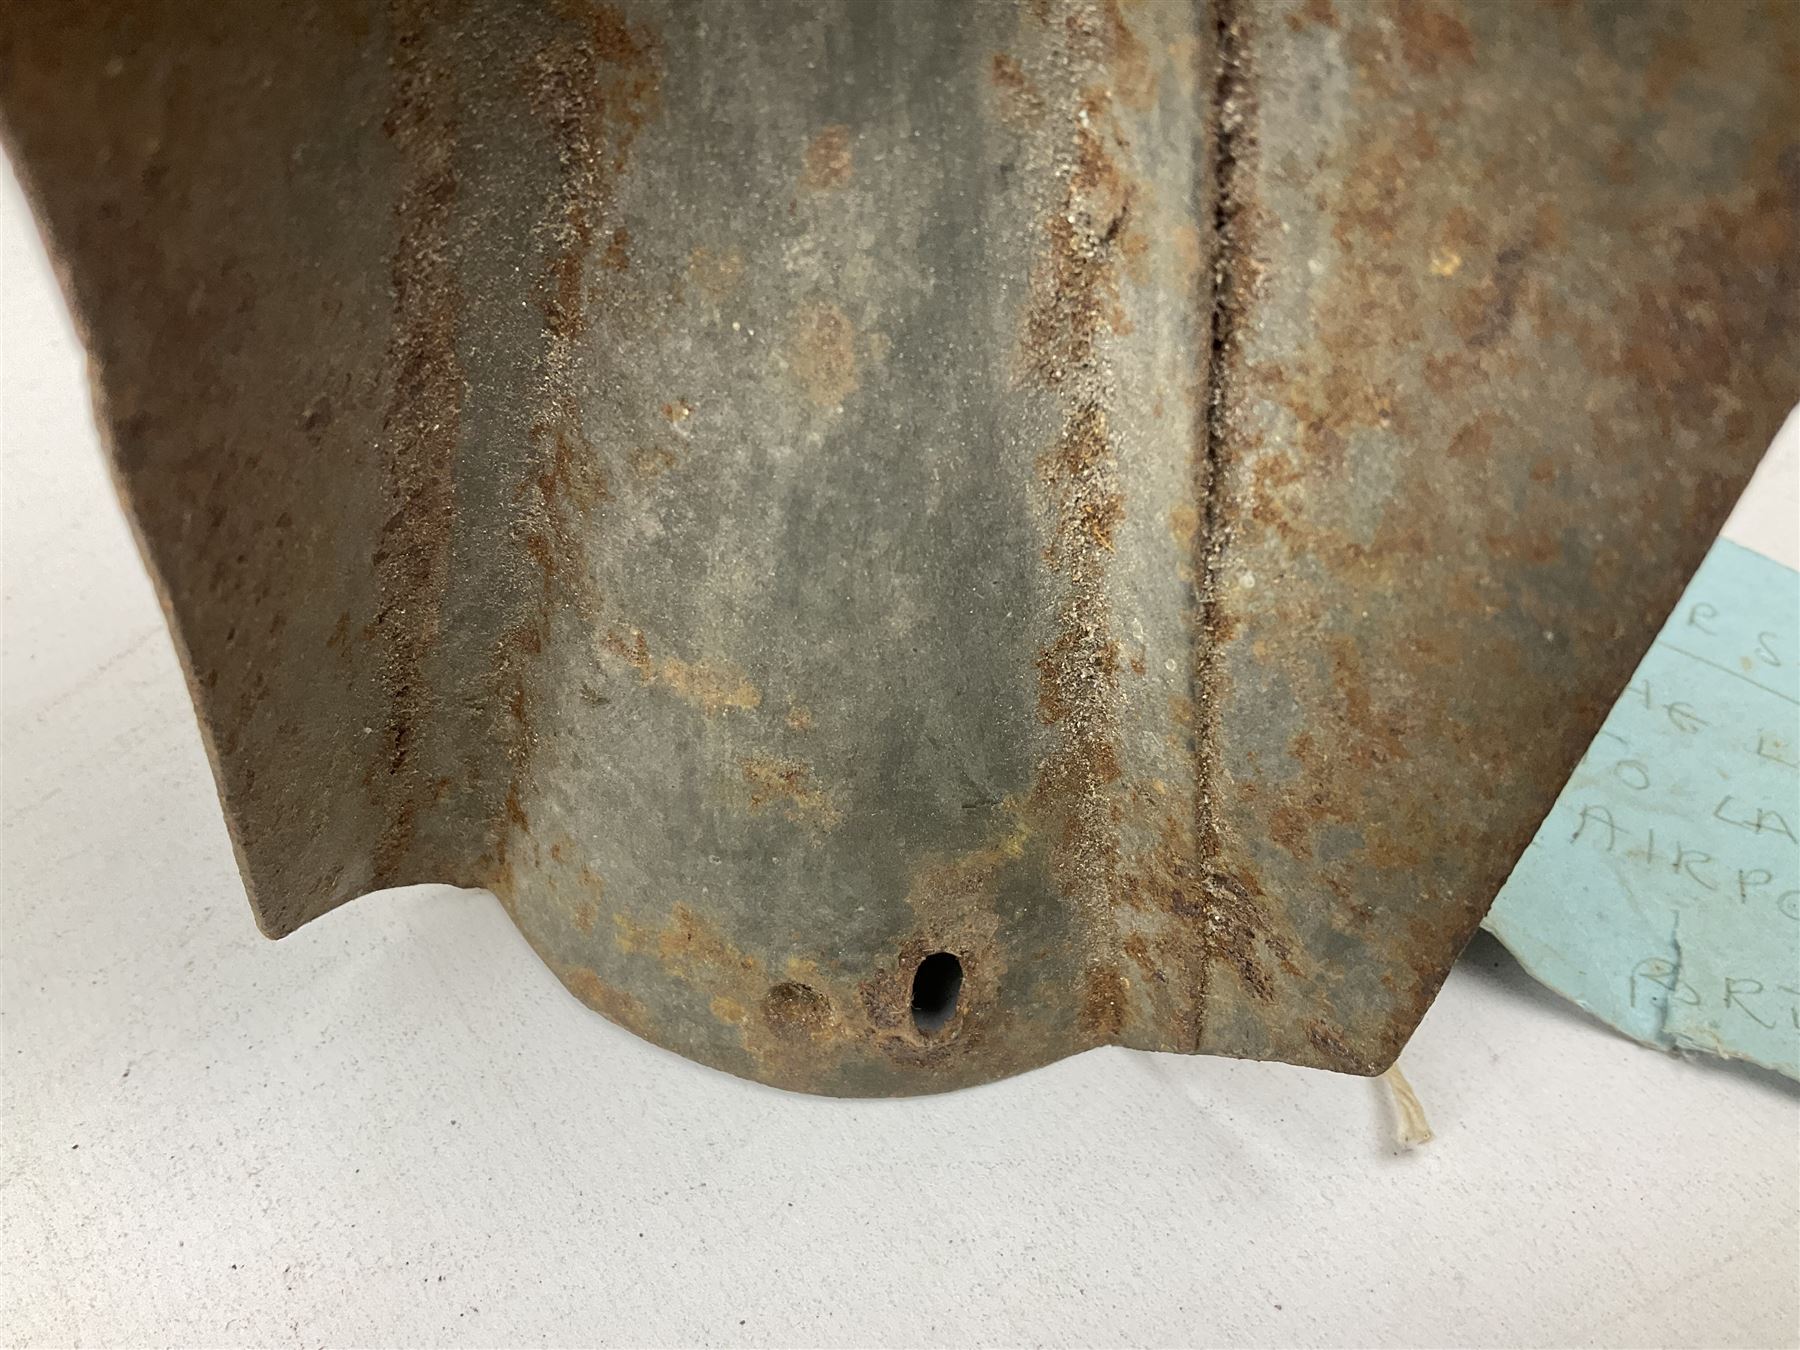 WWII bomb tail - Image 10 of 10